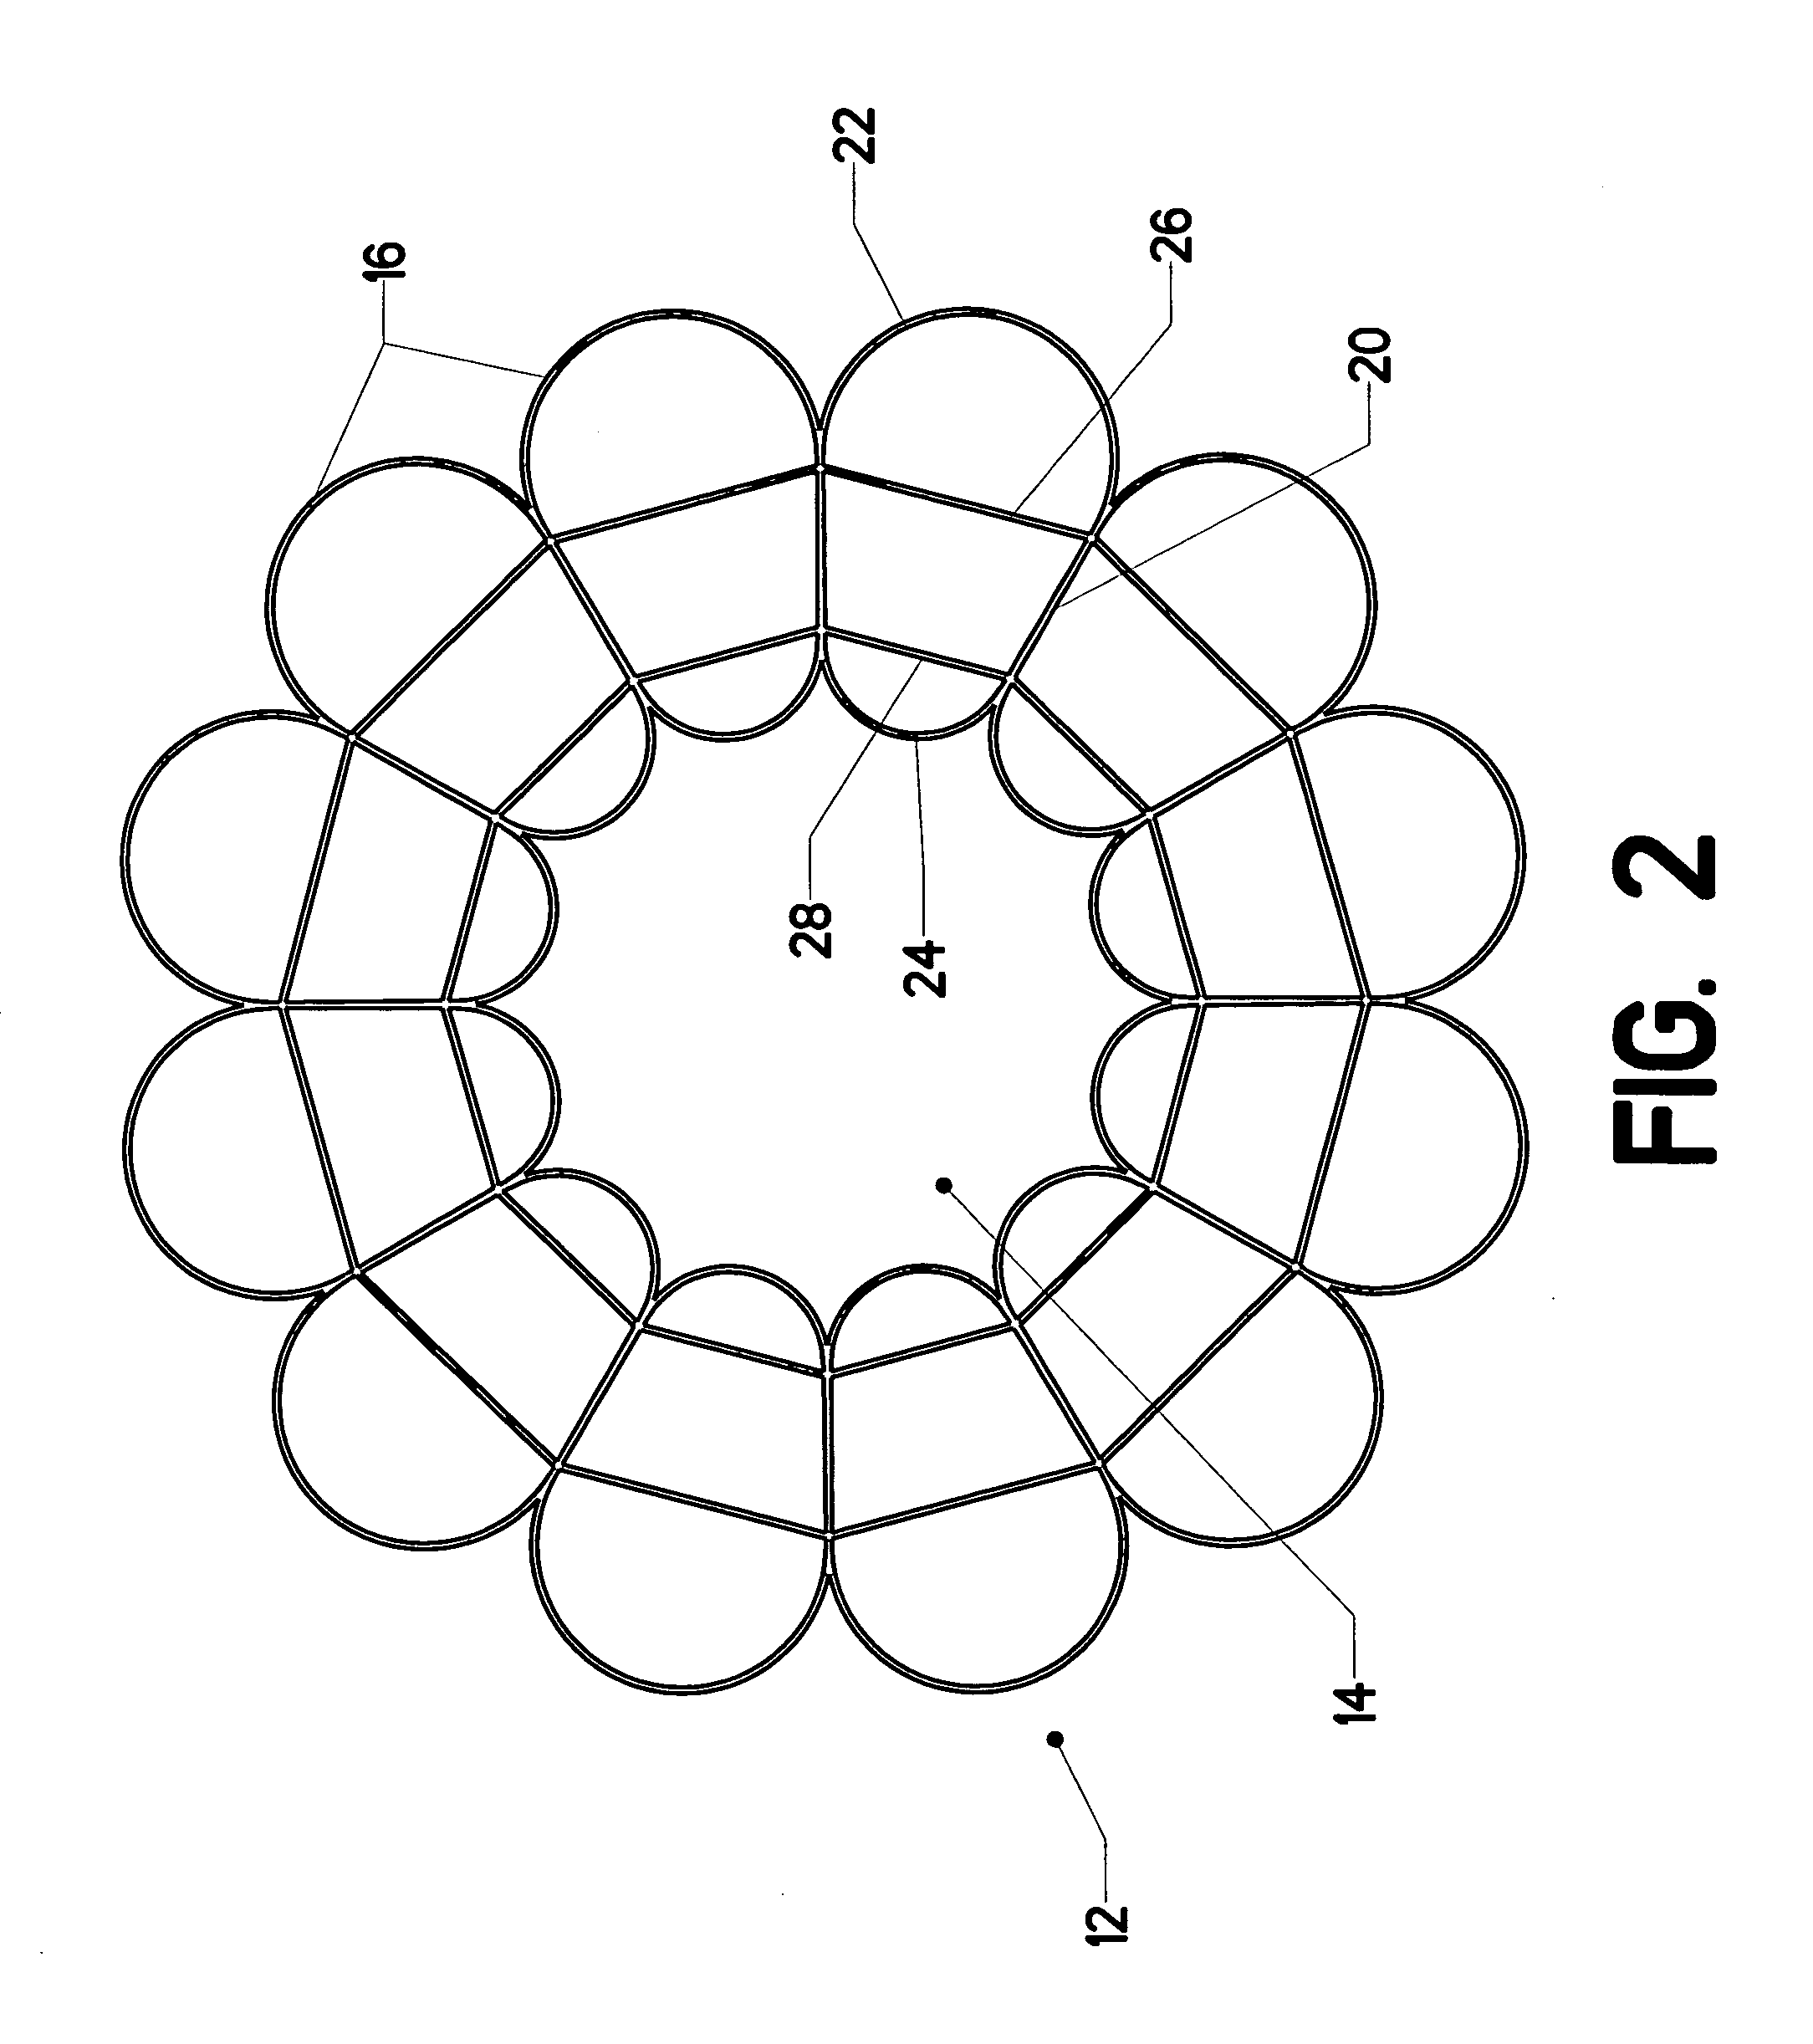 Light-weight vacuum chamber and appalications thereof